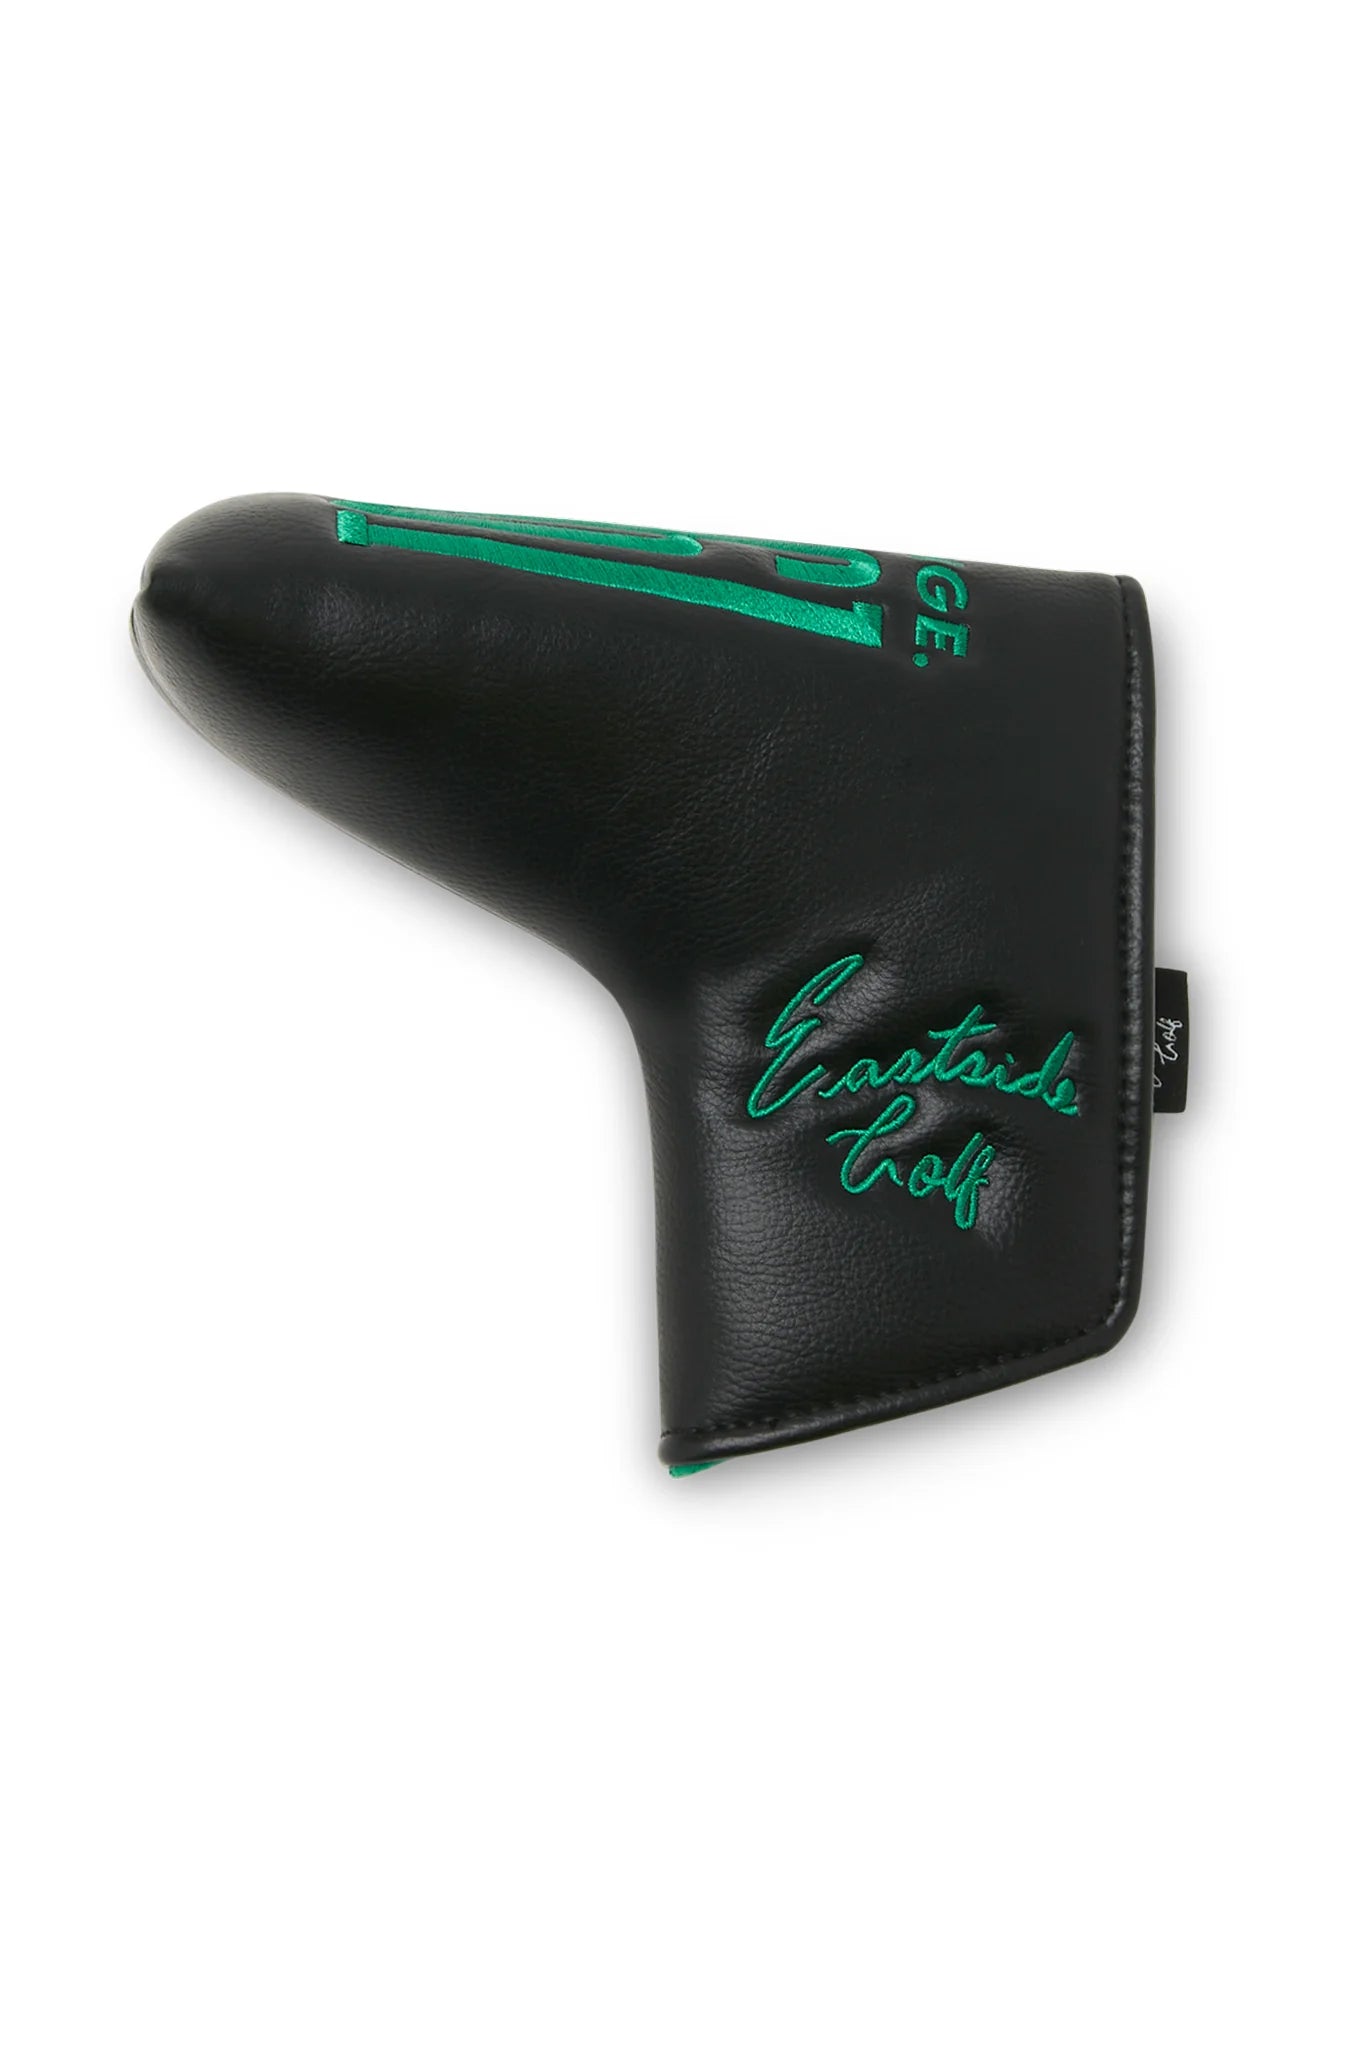 CHANGE.1961 Blade Putter Cover